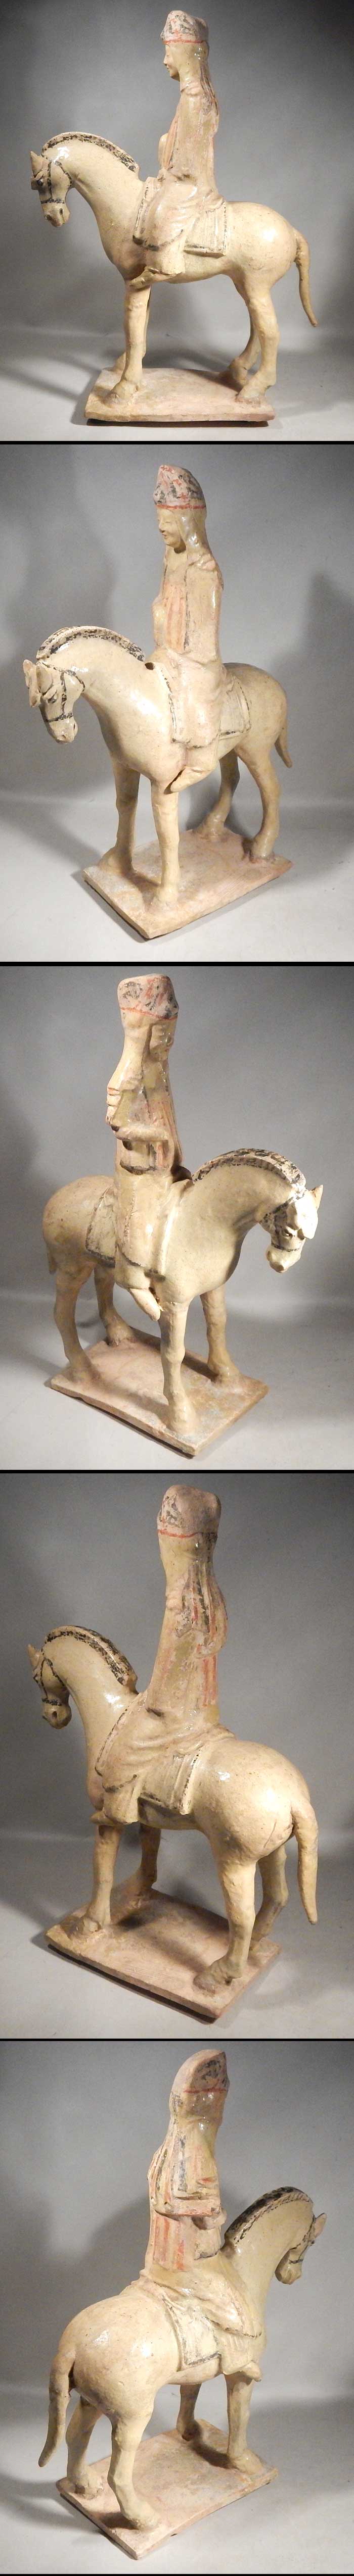 Chinese Sui Dynasty Horse and Rider Equestrian Figure